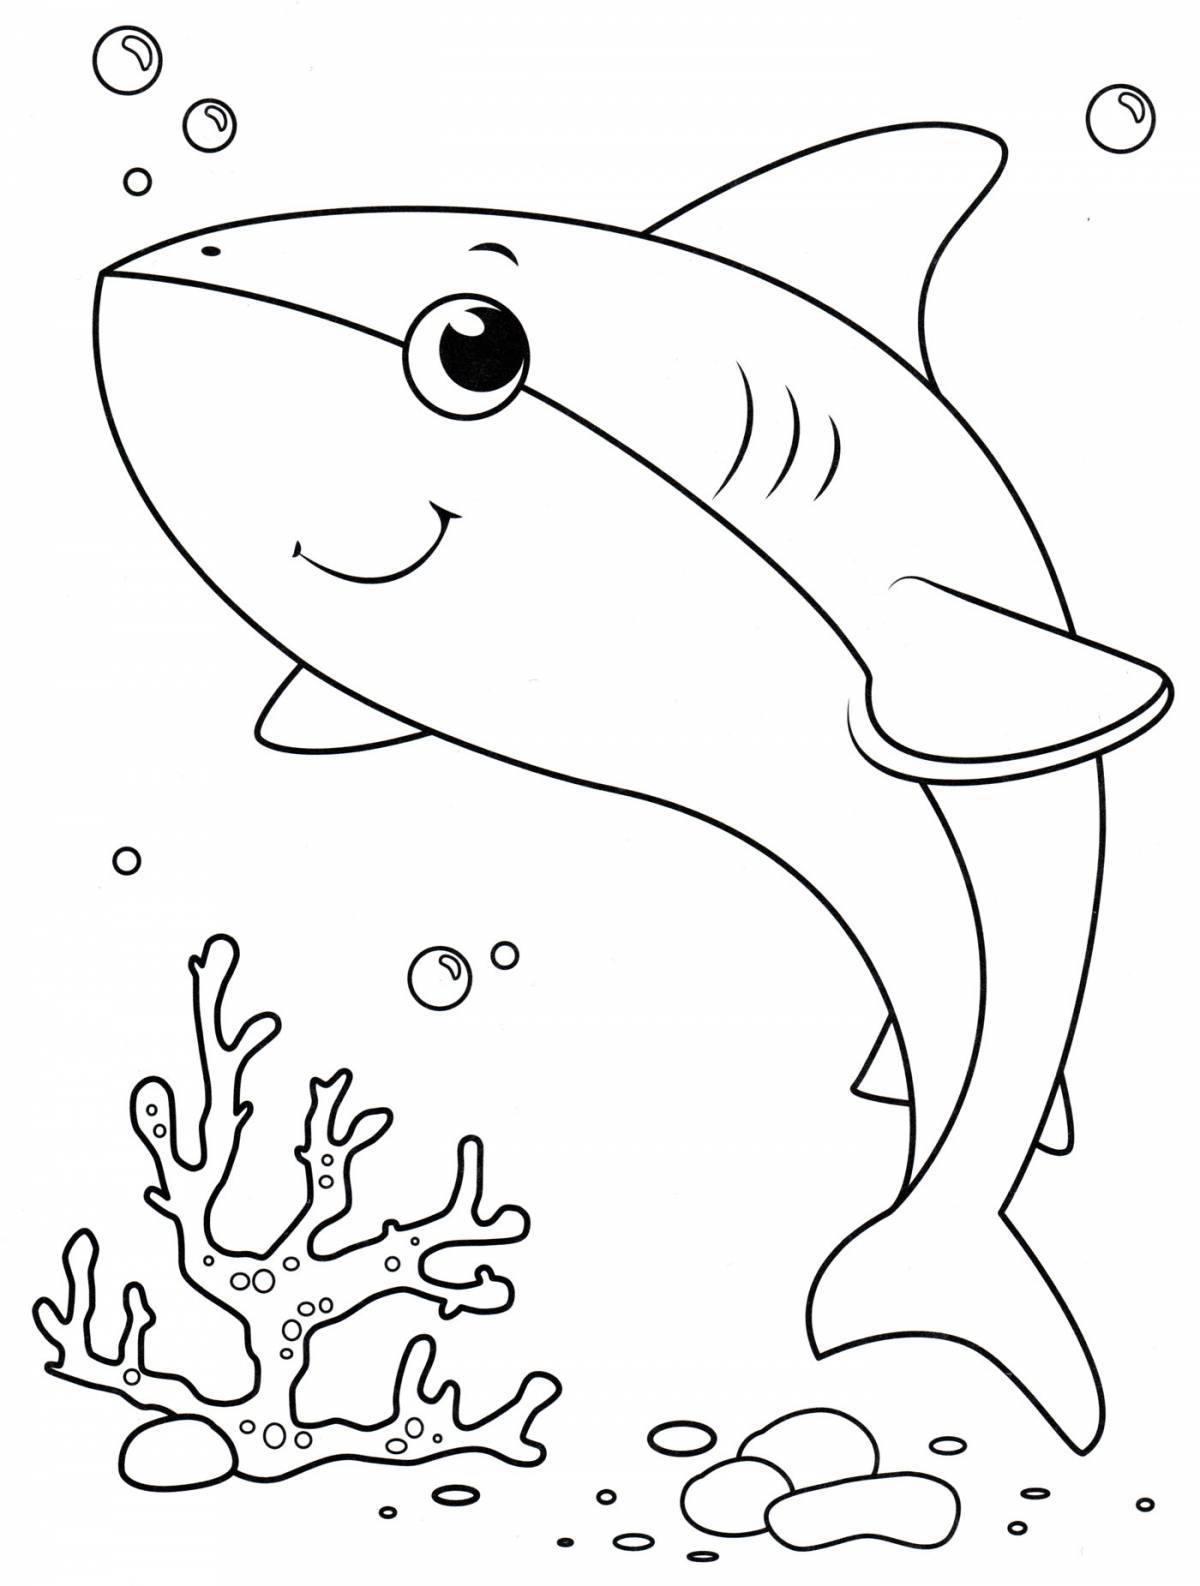 Shark coloring book for kids